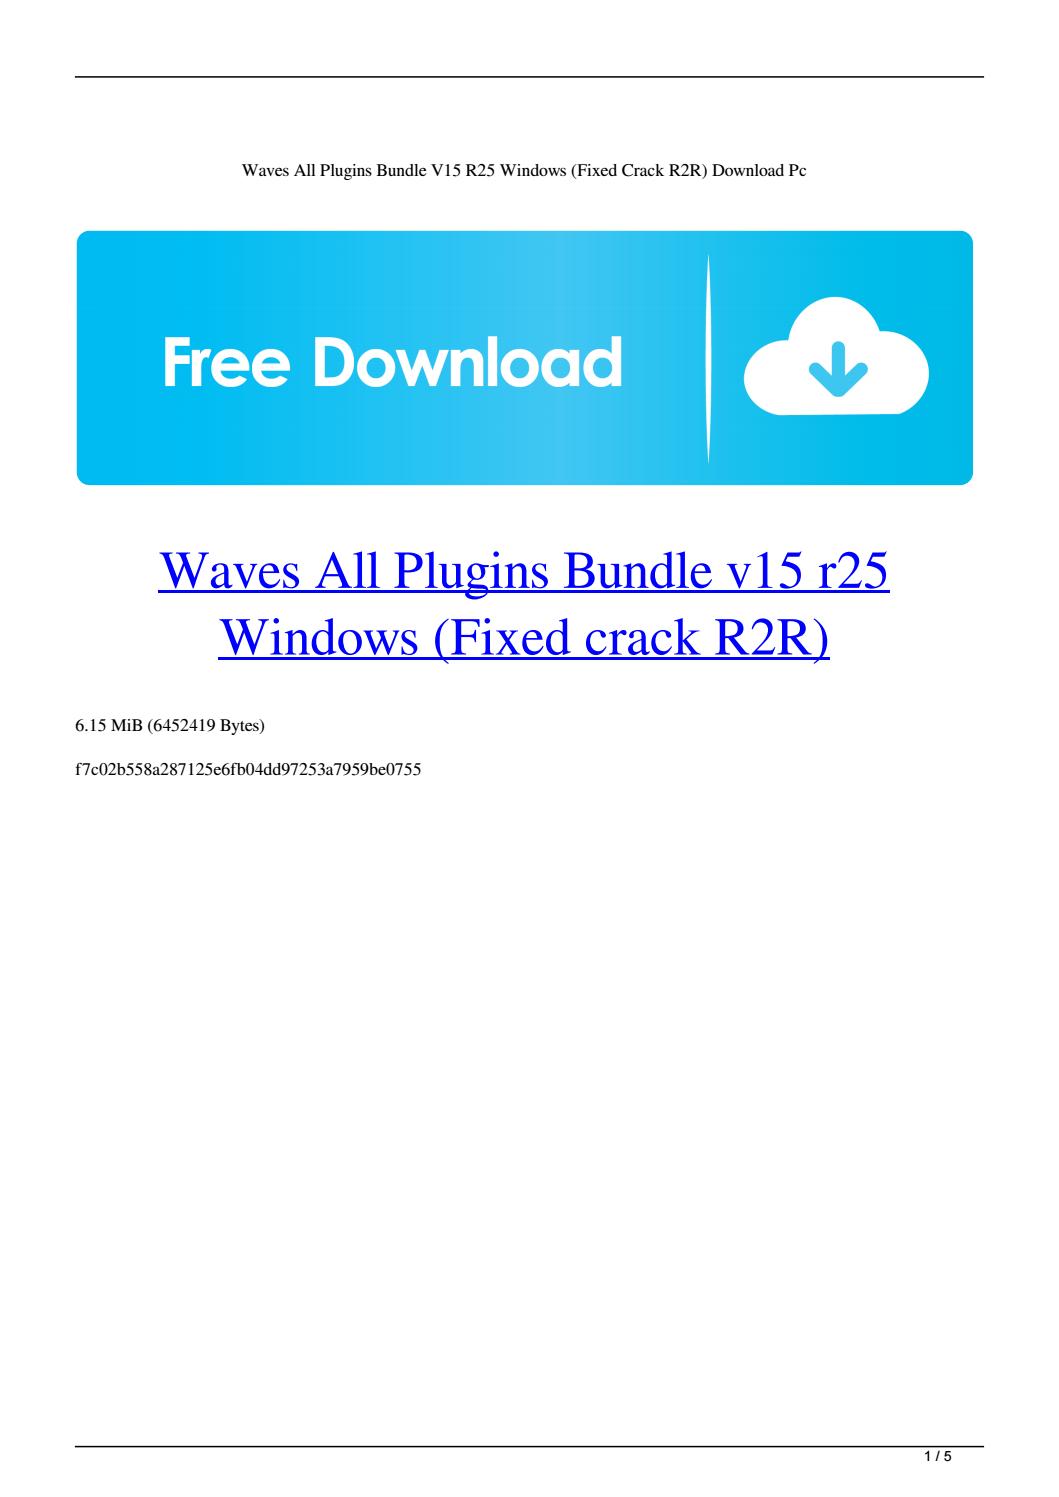 How to install cracked waves bundle crack